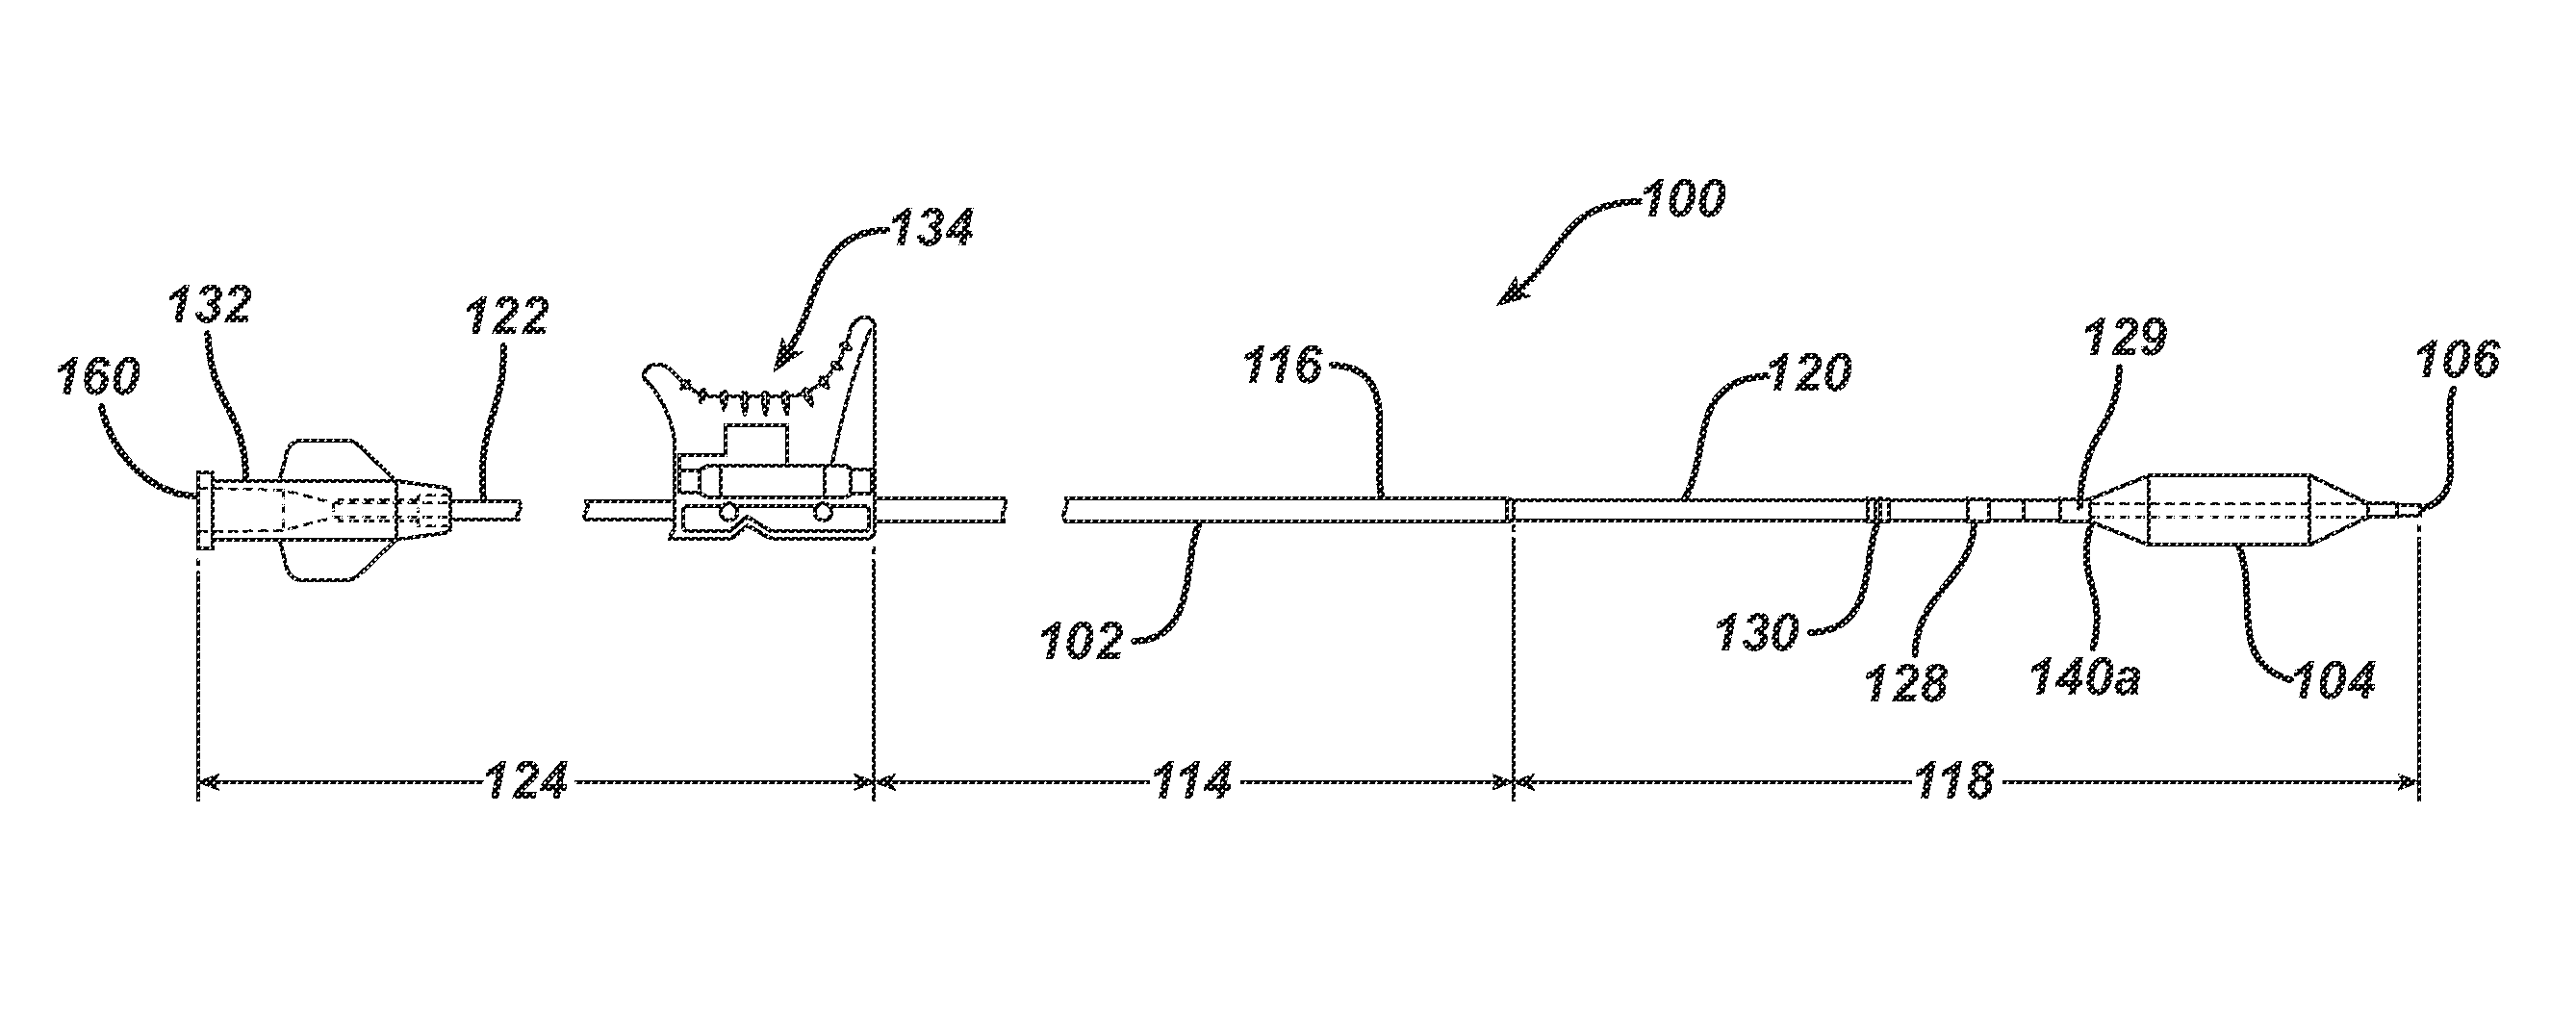 Balloon dilation catheter system for treatment and irrigation of the sinuses